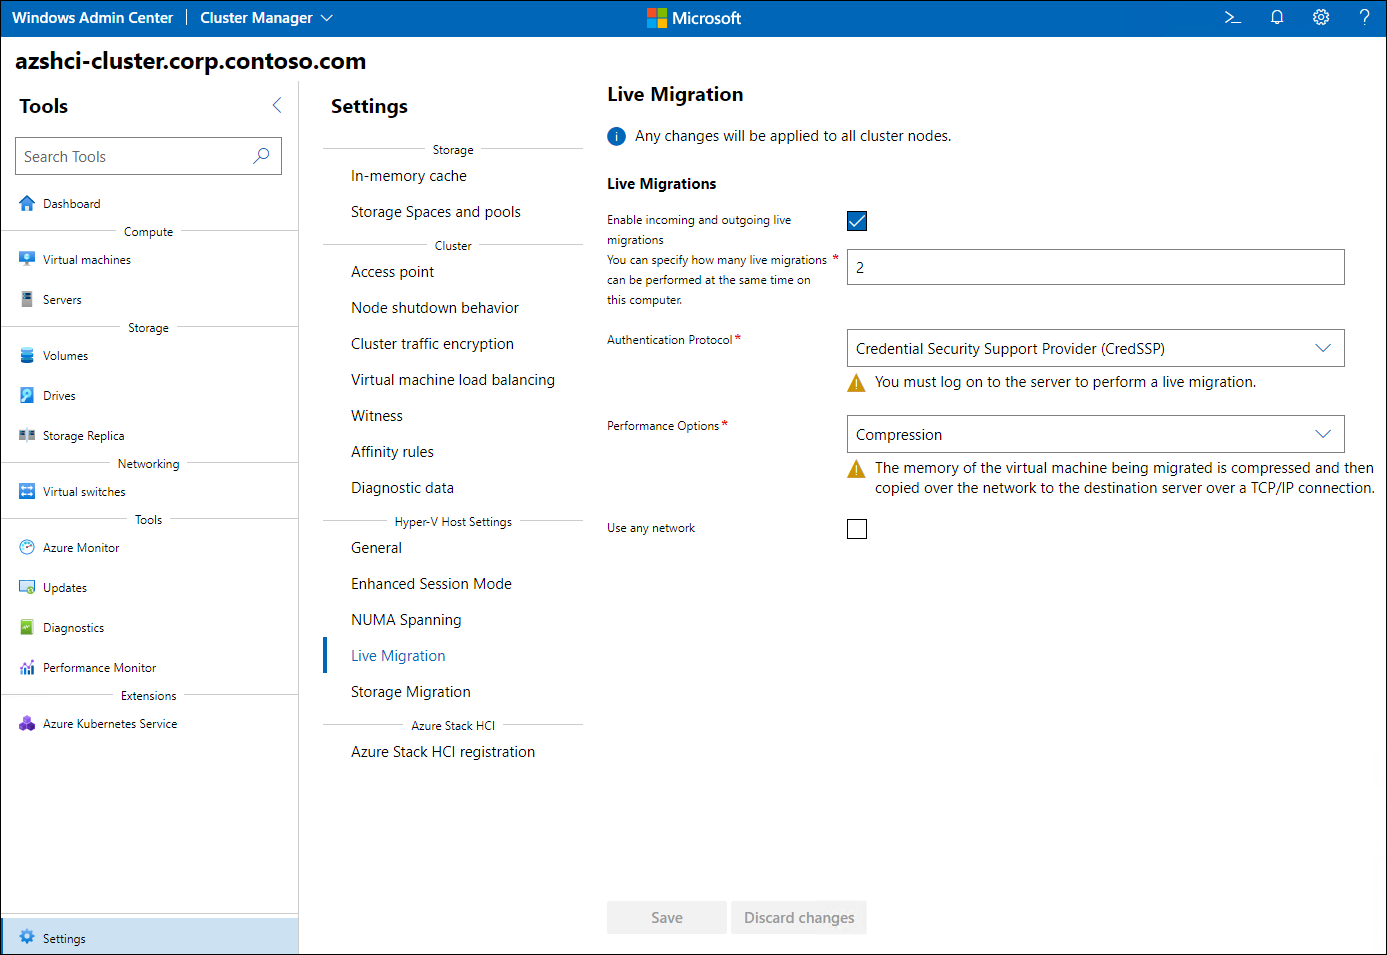 The screenshot depicts the Live Migration settings of an Azure Stack HCI cluster.